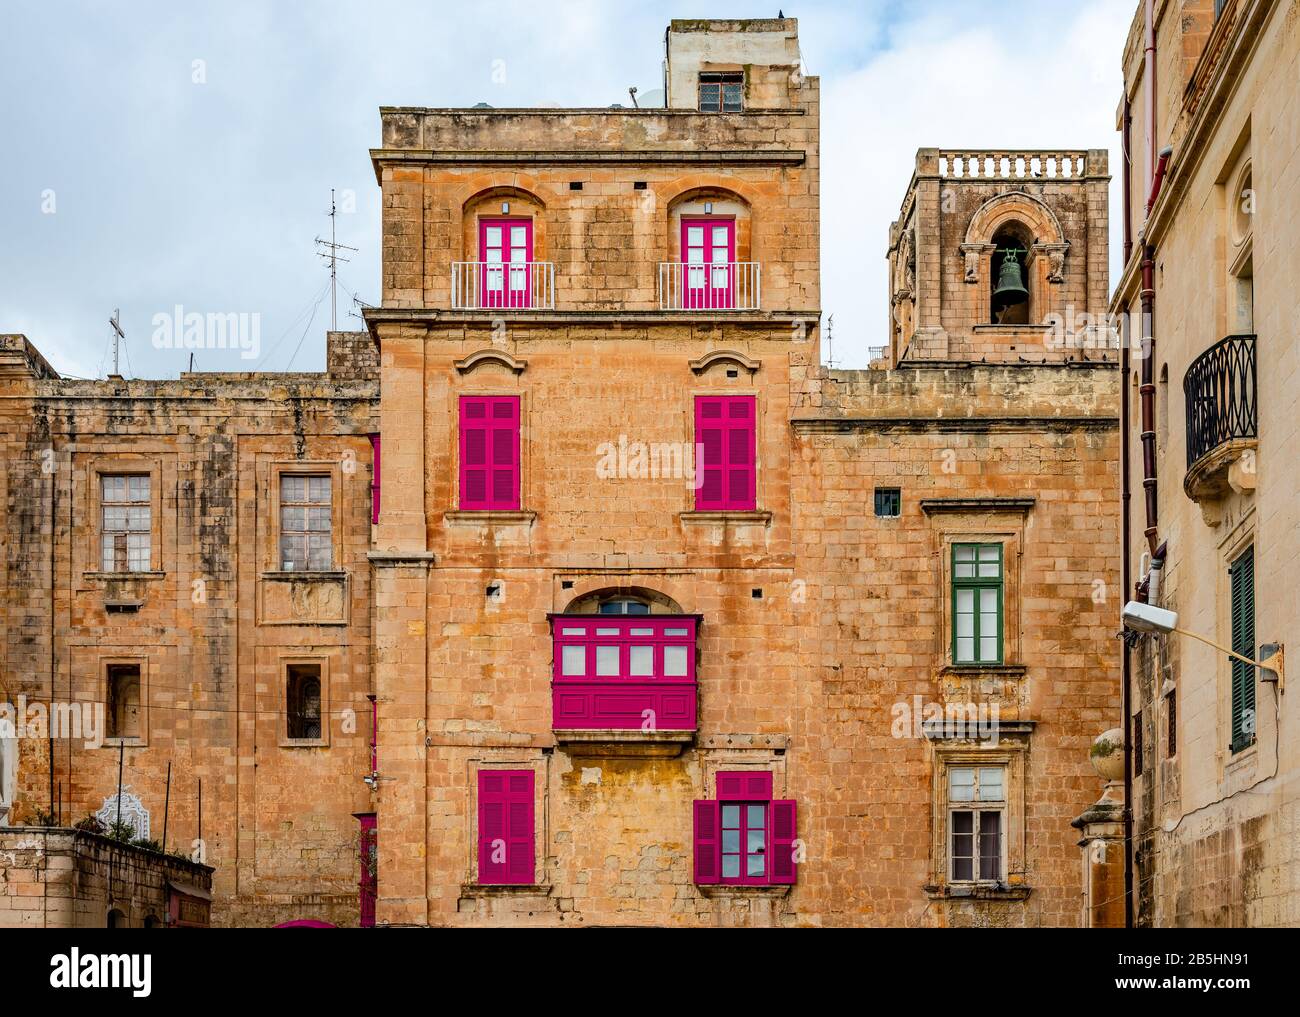 Old houses with colorful wooden balconies in La Valletta, Malta, typical of the traditional Maltese architecture. Stock Photo